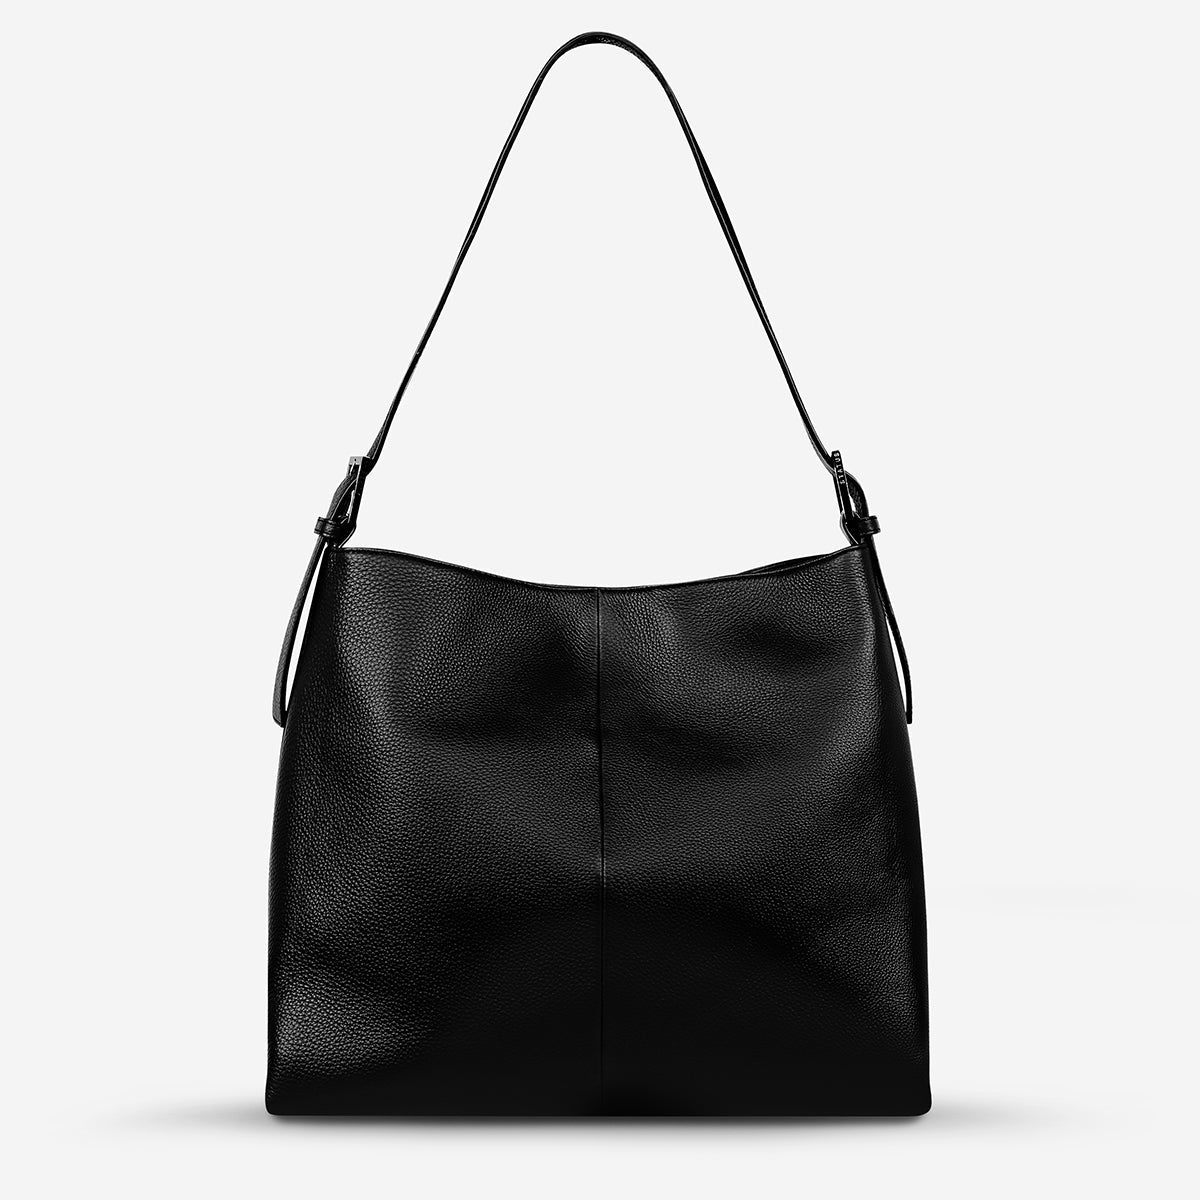 Forget About It Bag -Black